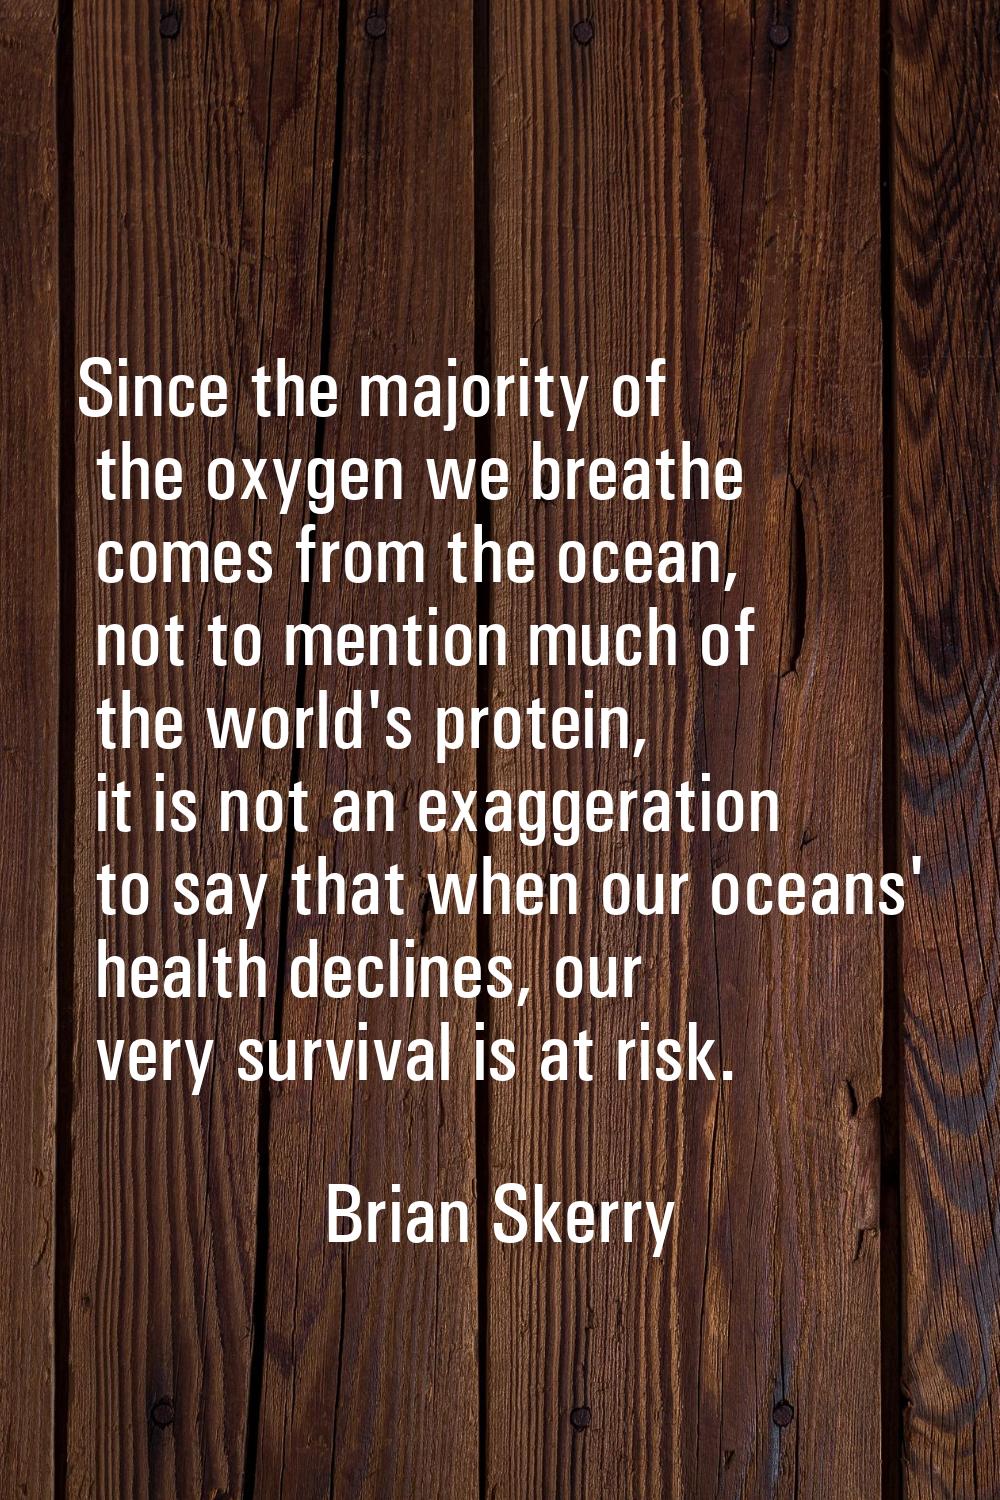 Since the majority of the oxygen we breathe comes from the ocean, not to mention much of the world'